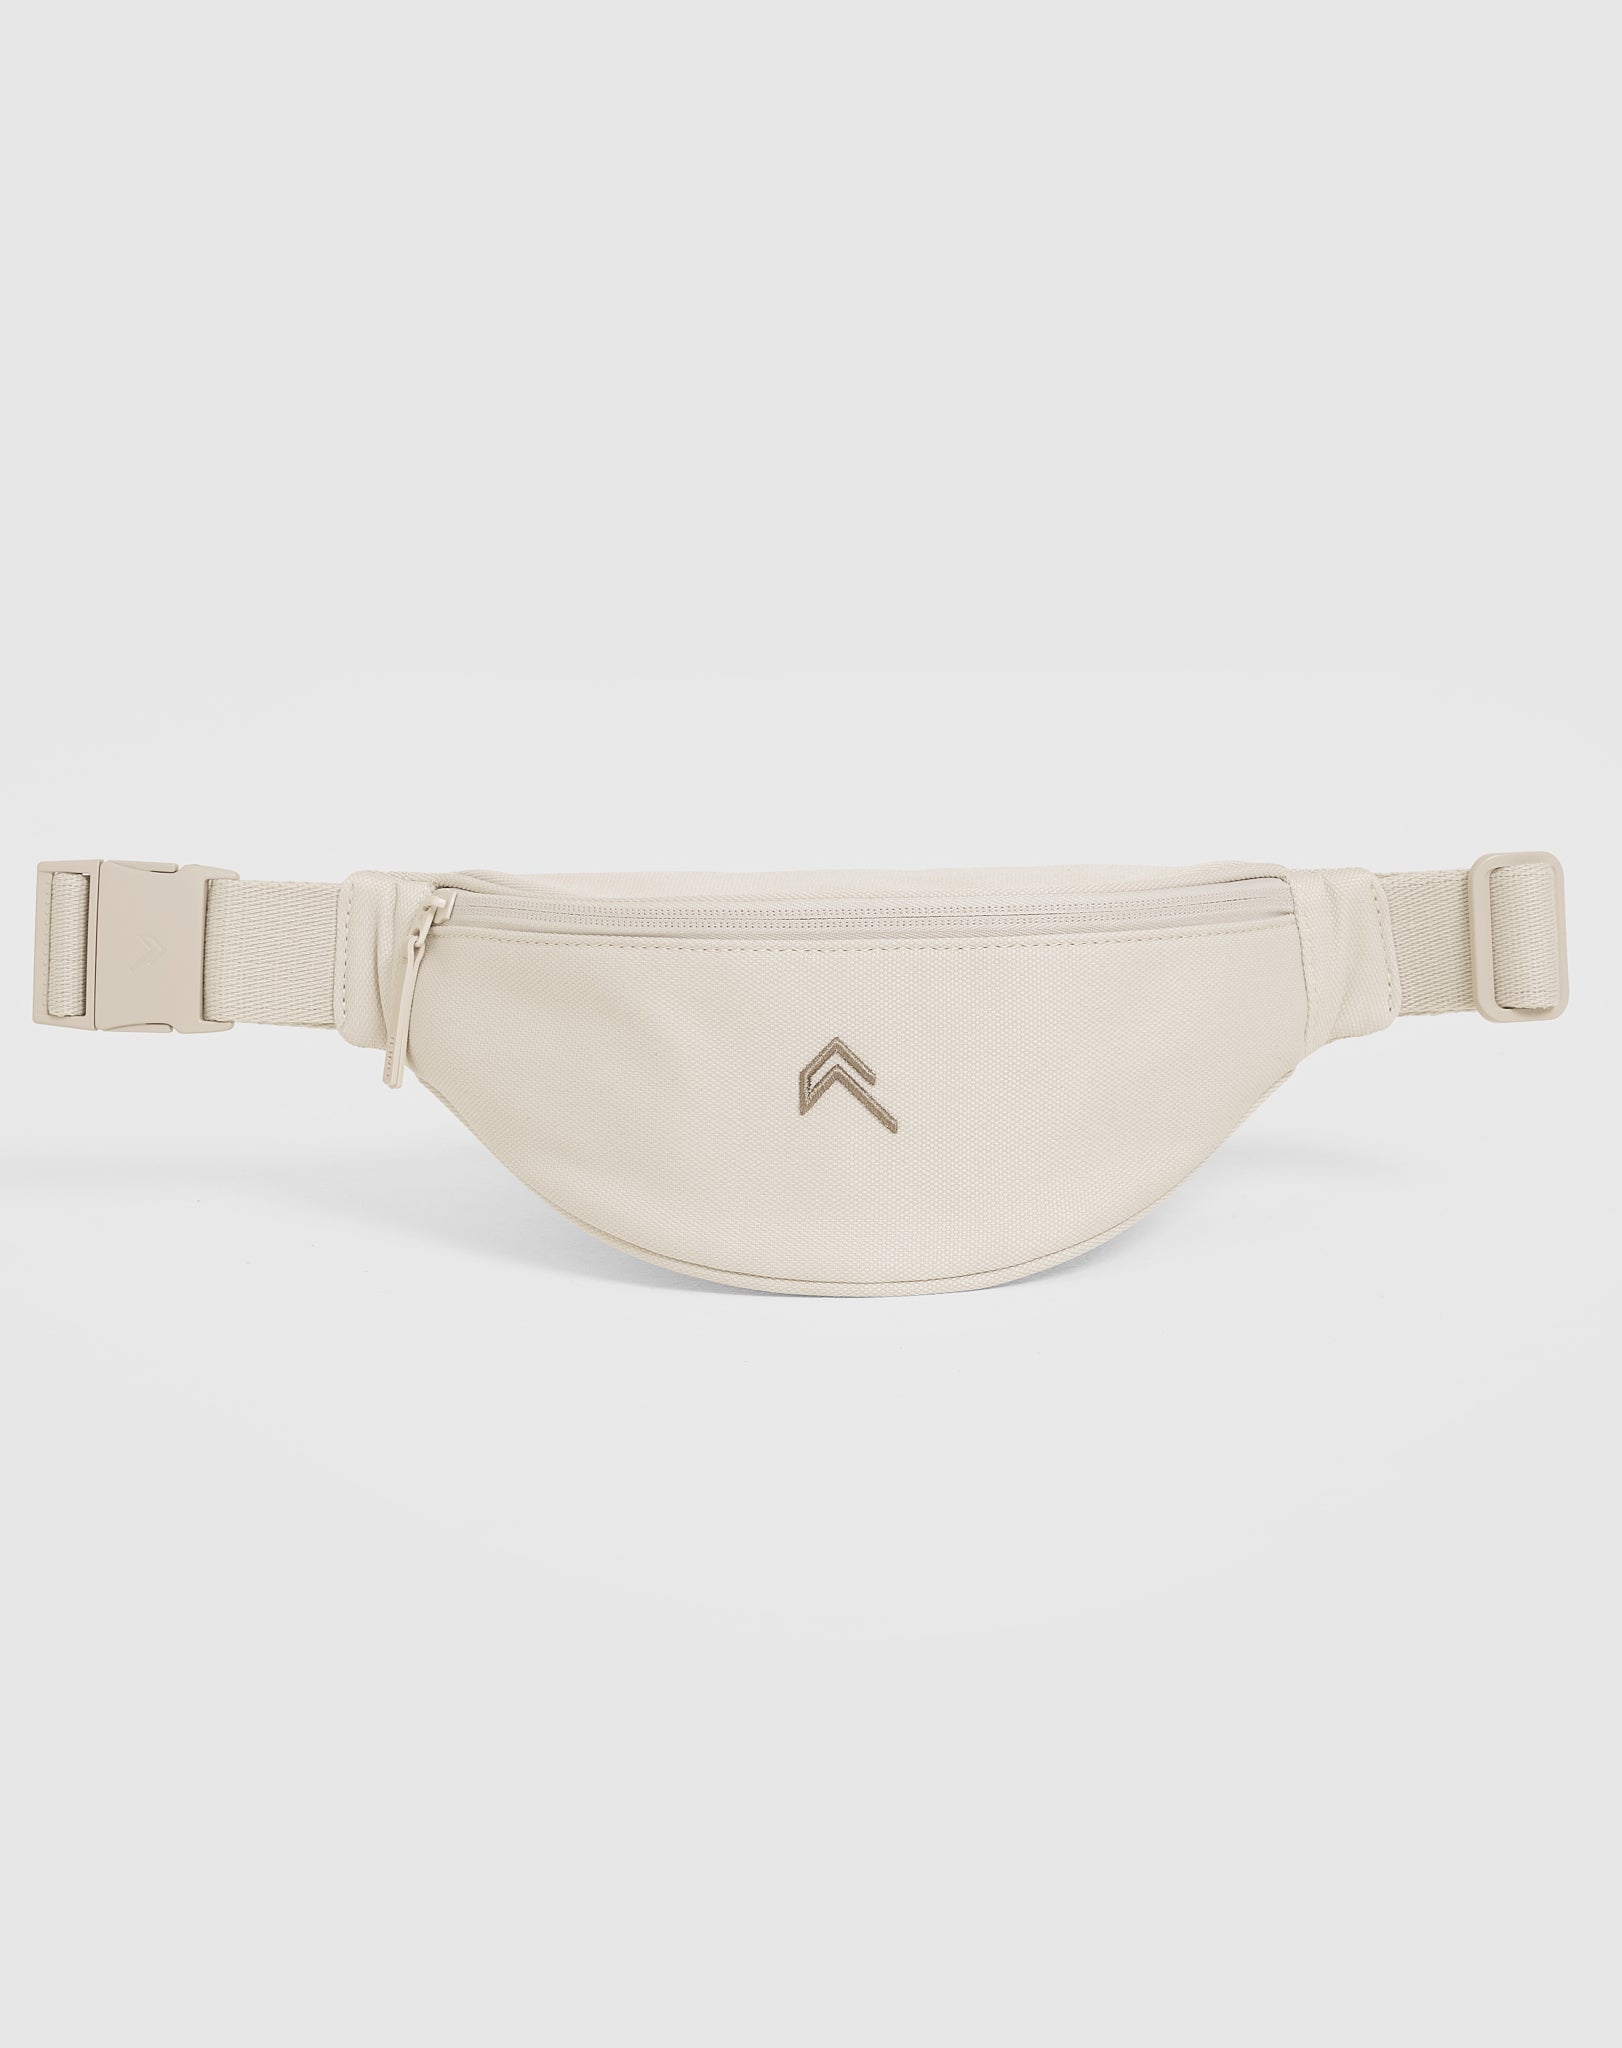 Canvas Bumbag Women's - Sand - Stylish & Functional | Oner Active